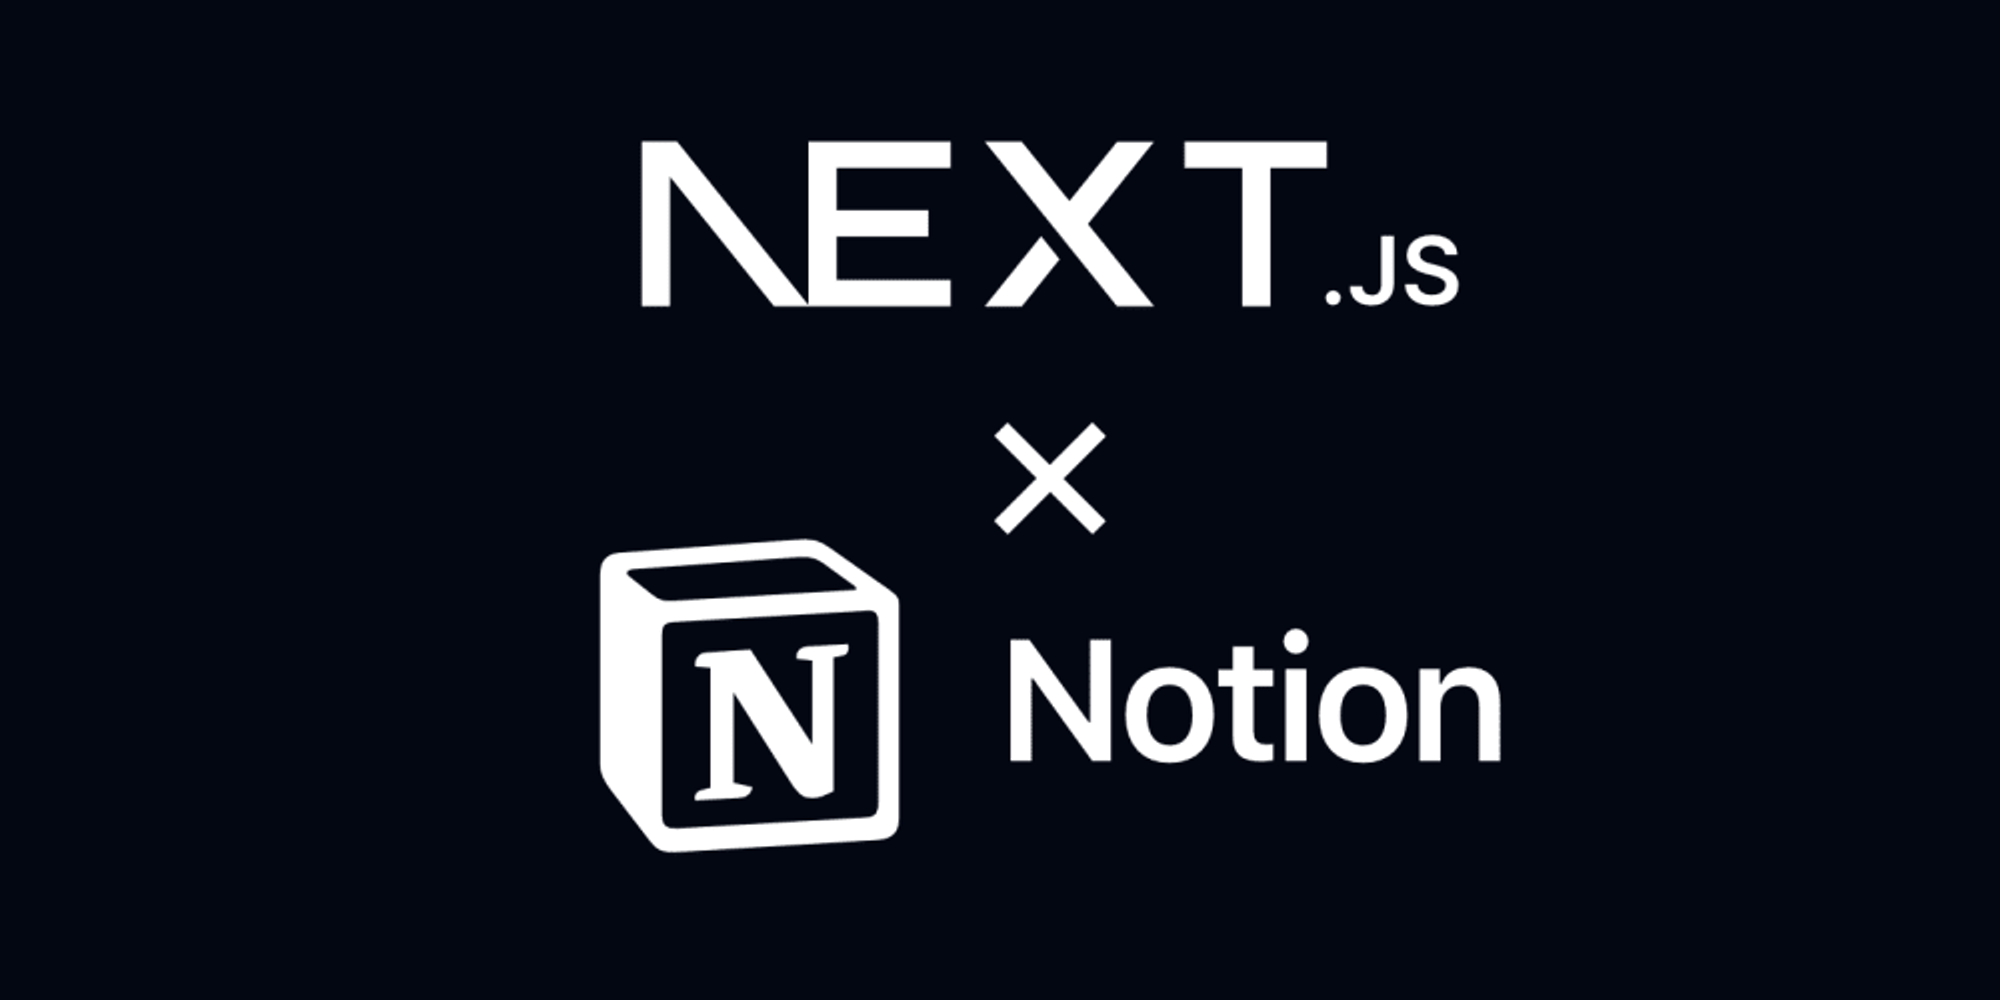 Use Notion as a database for your Next.JS Blog